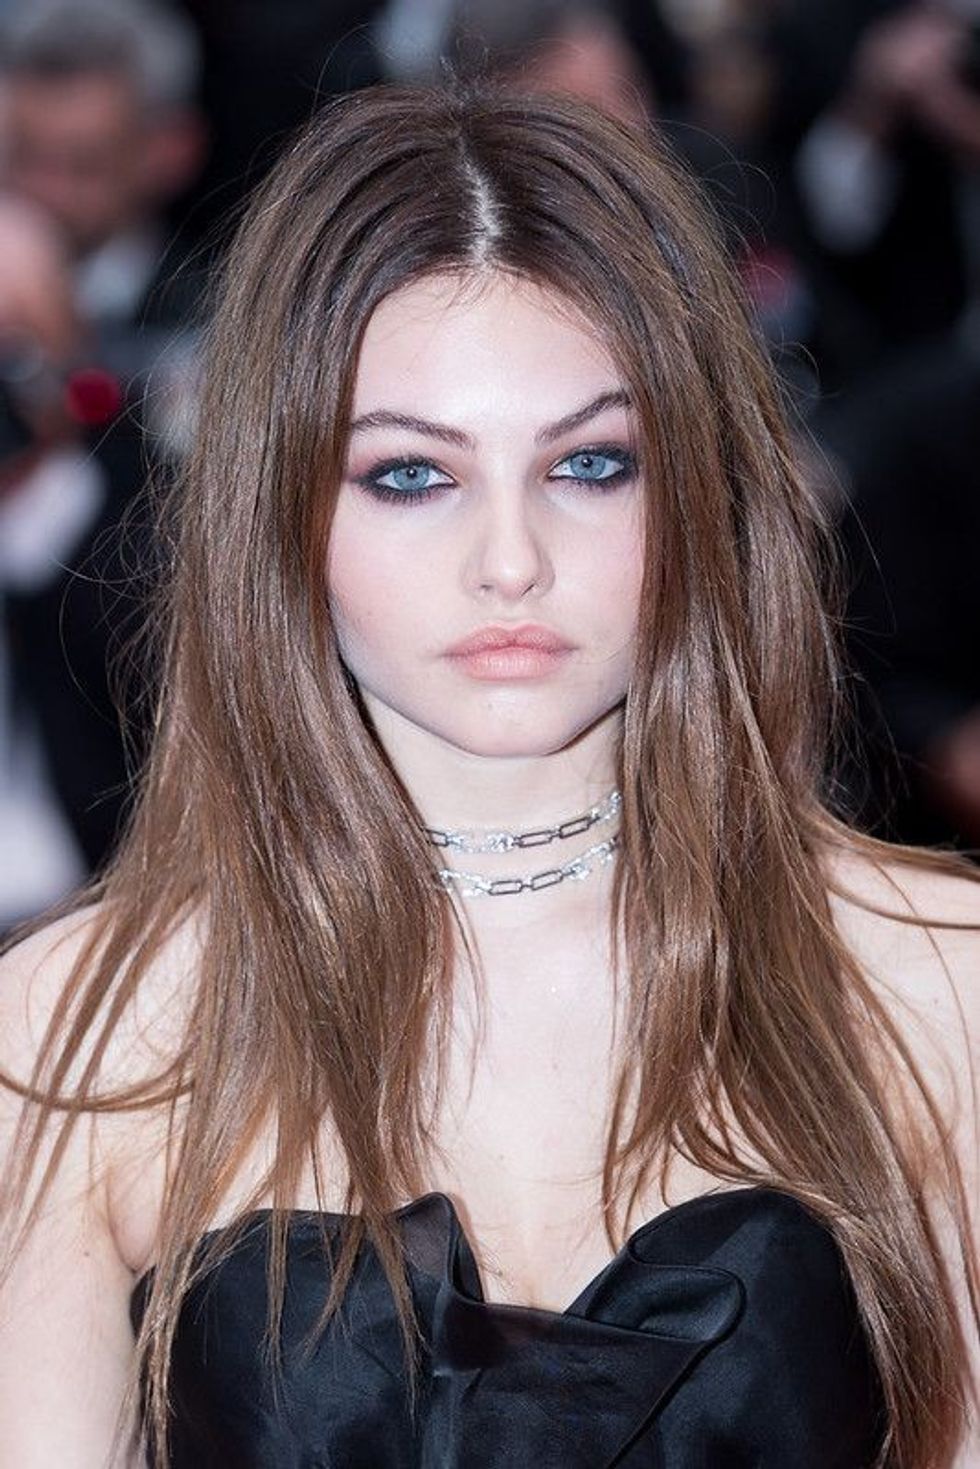 French model Thylane Blondeau is well-known for receiving the title of The Most Beautiful Girl In The World at the age of six.